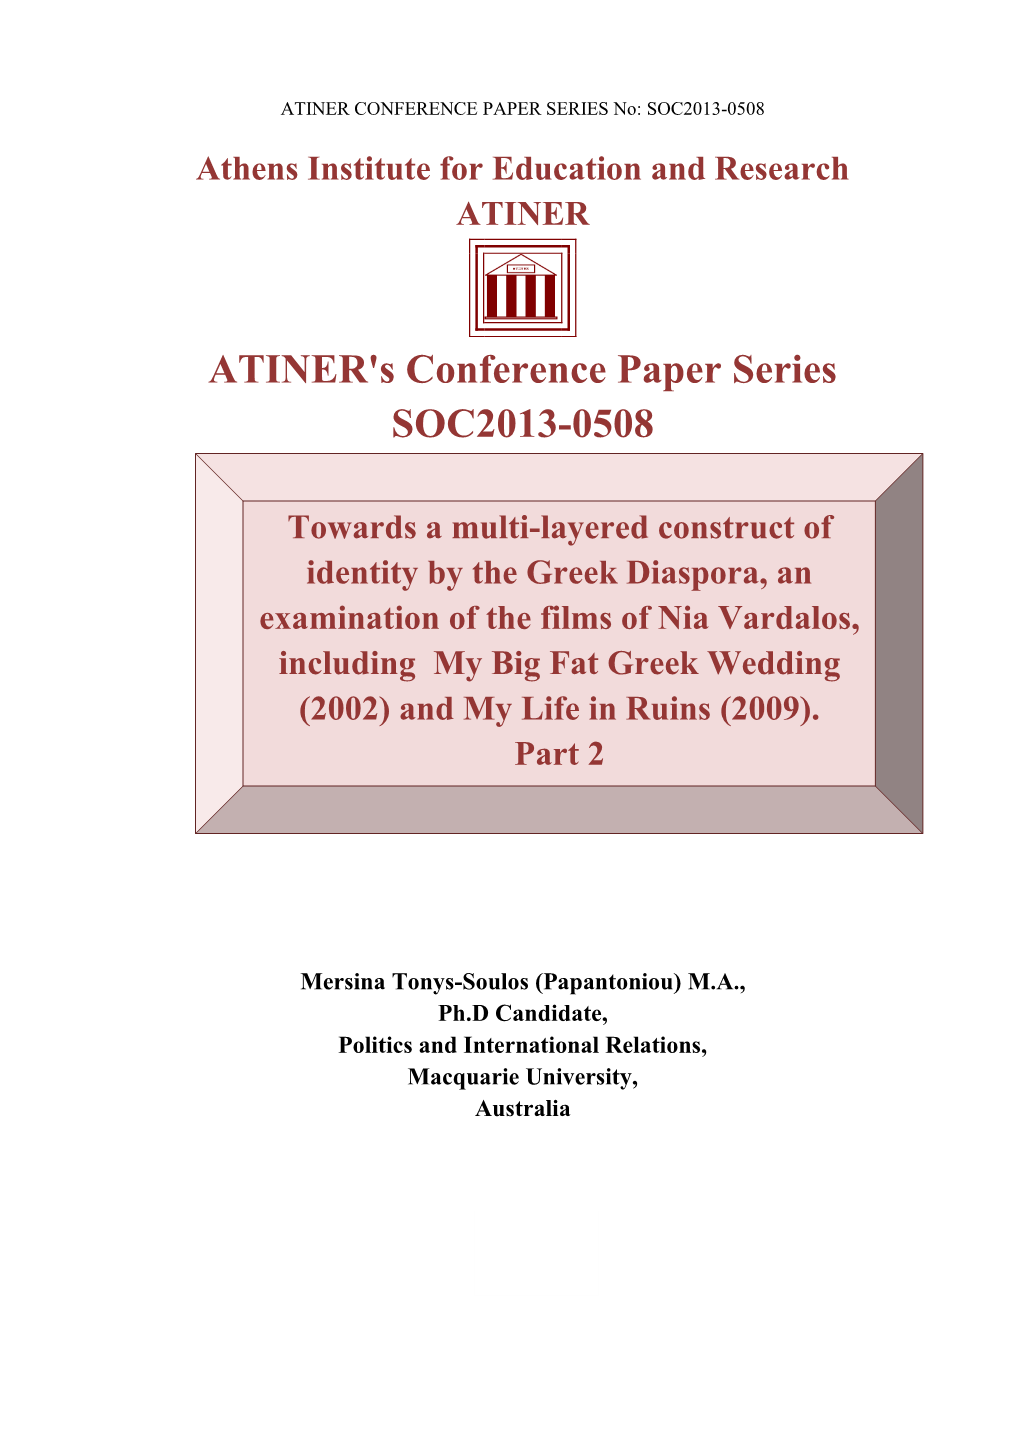 ATINER's Conference Paper Series SOC2013-0508